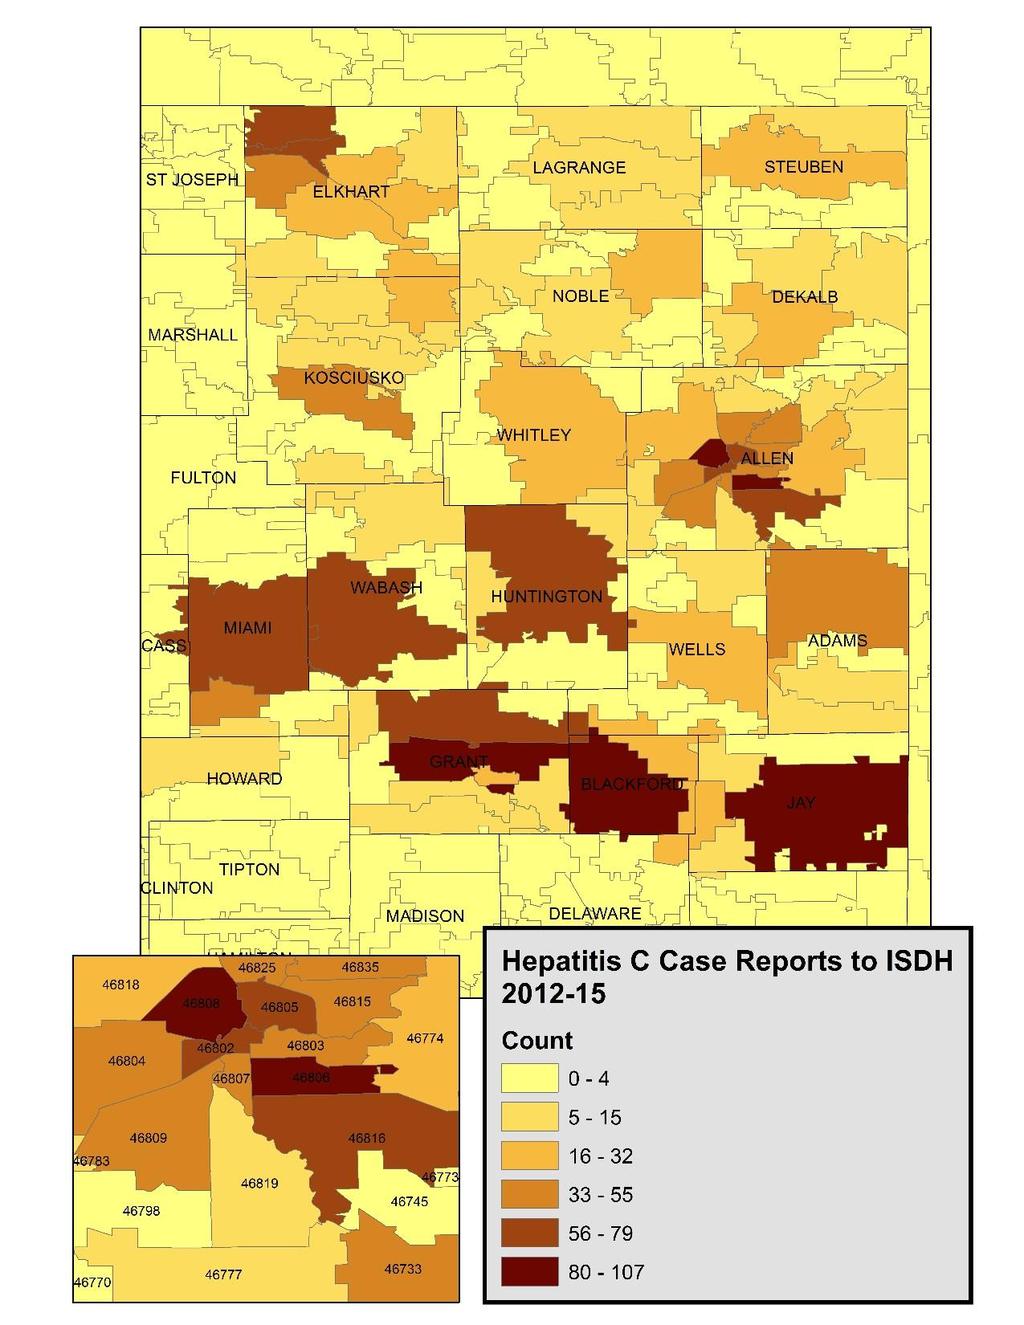 Hepatitis C in NE Indiana 2012 2015 ISDH Chronic and Acute Case reports by county and zip code 99